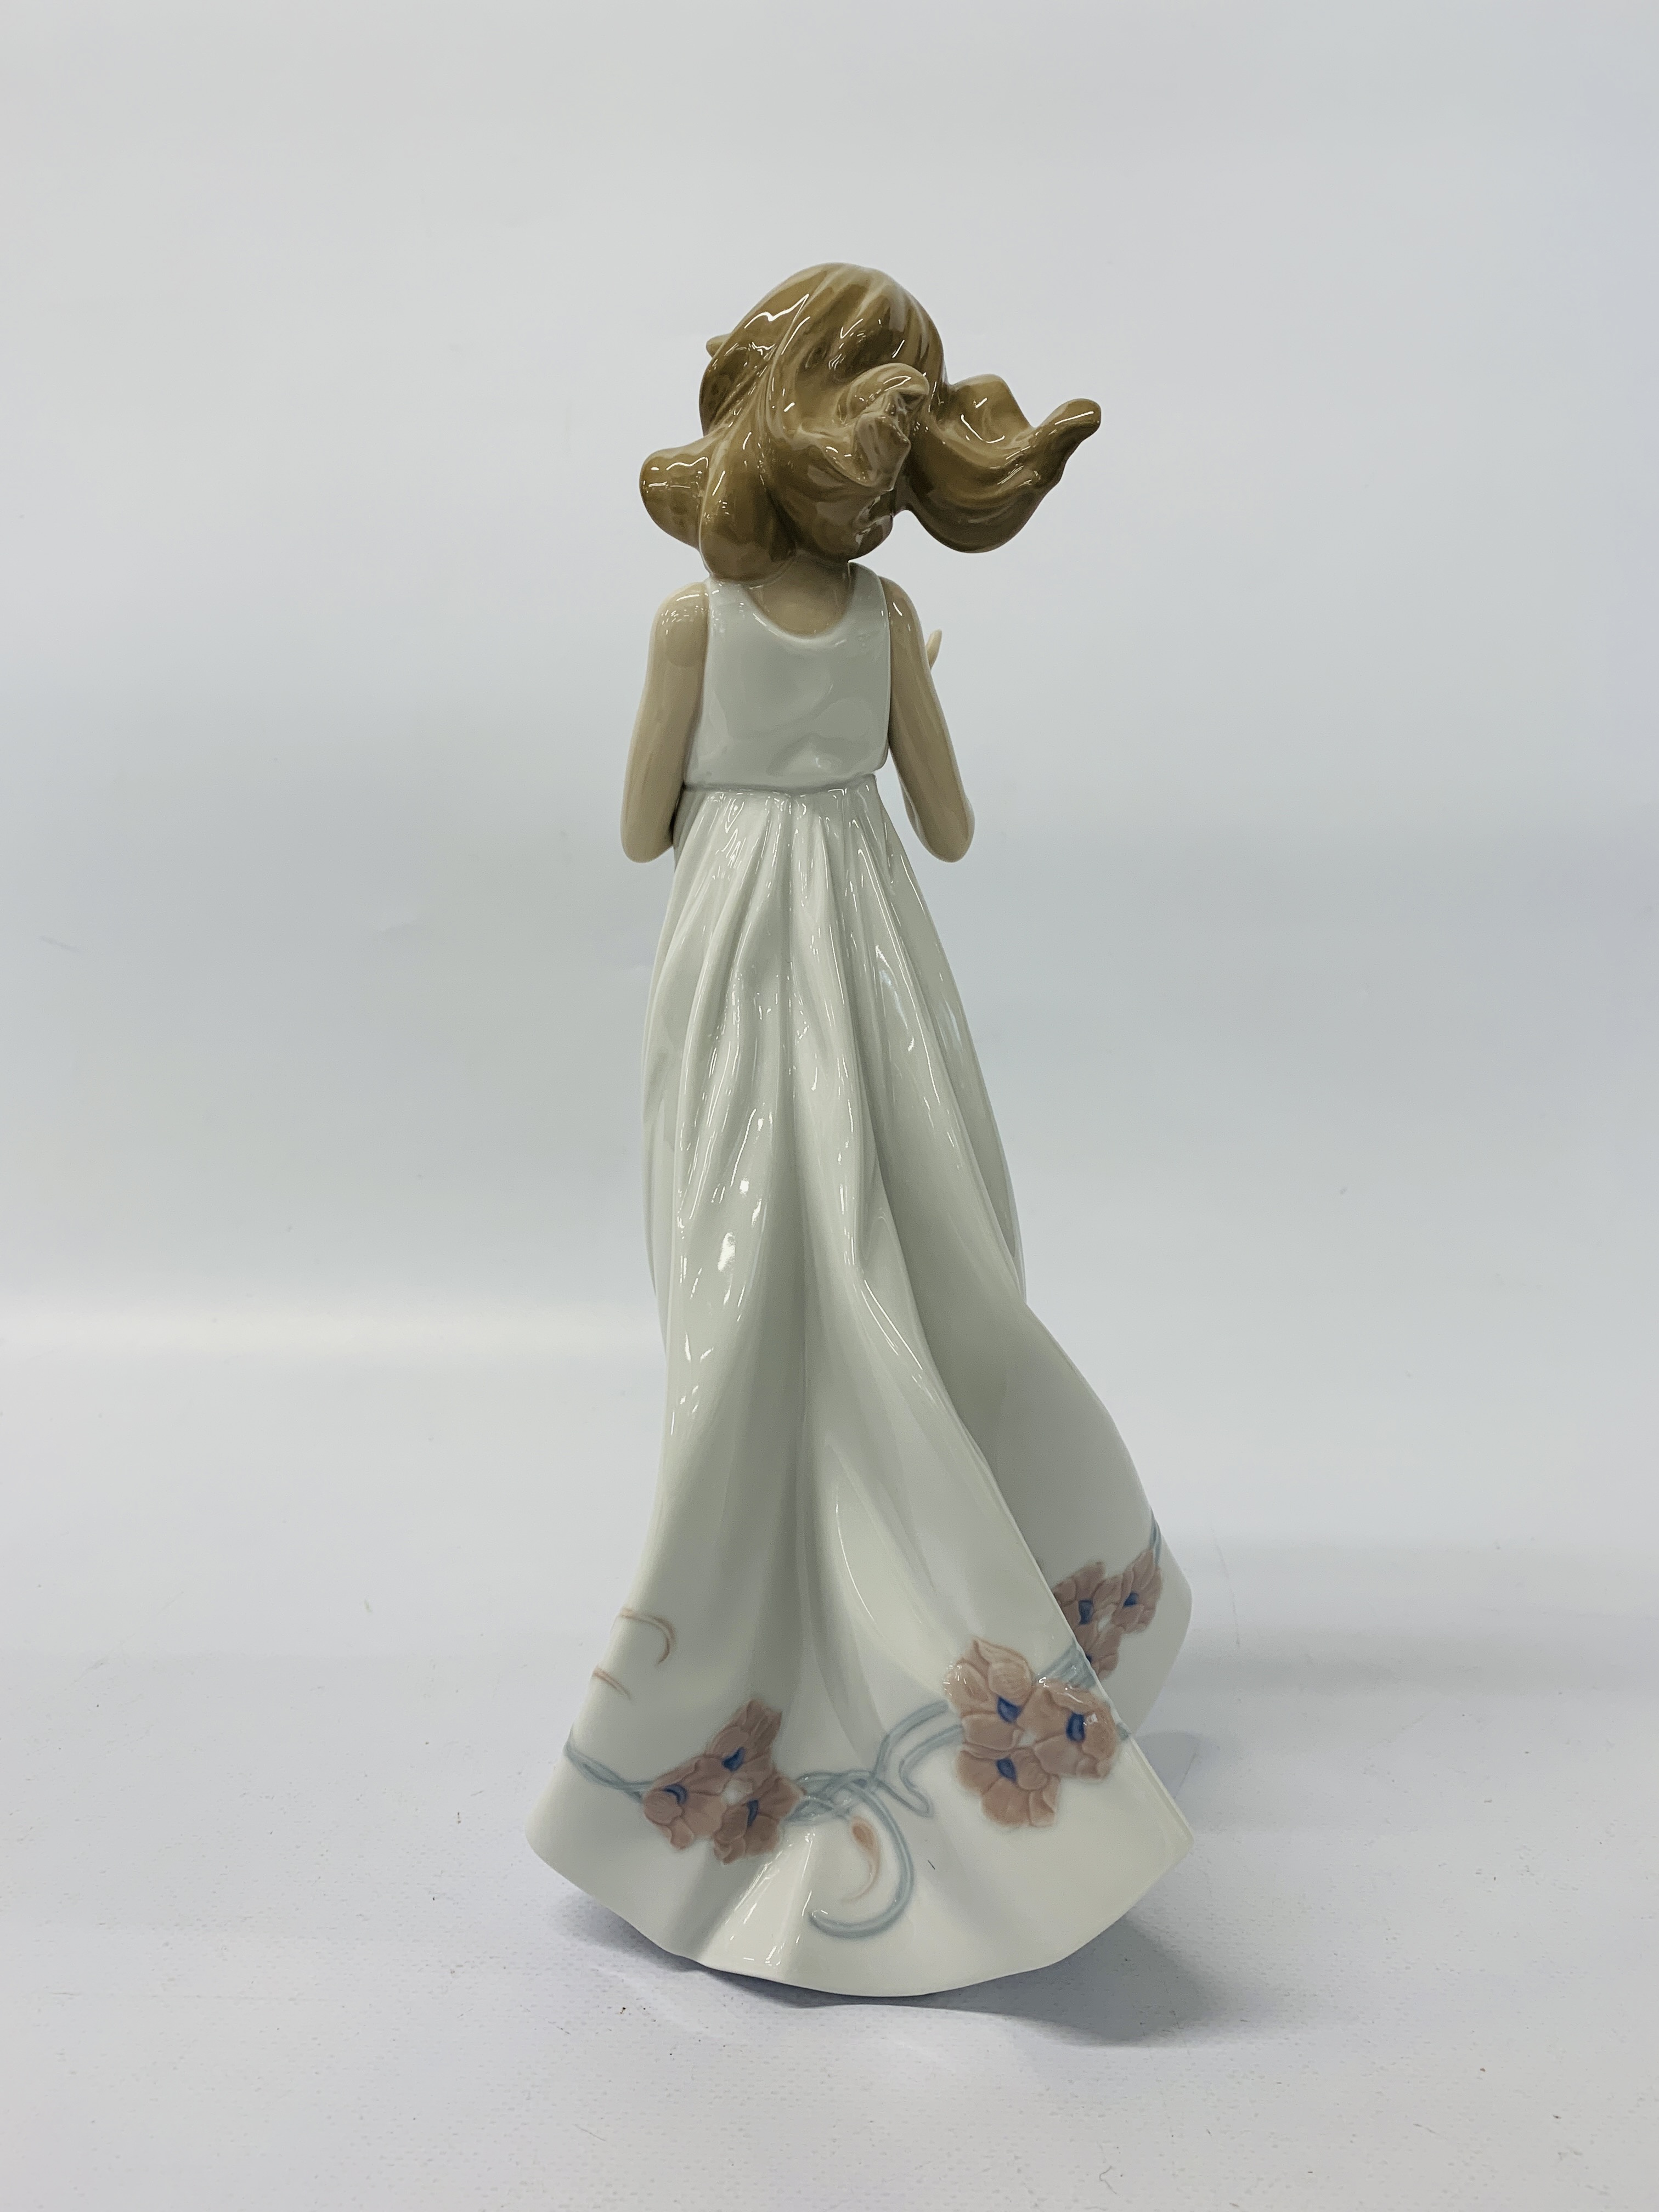 LLADRO FIGURINE 6777 "BUTTERFLY TREASURES" 32 CM. - Image 3 of 7